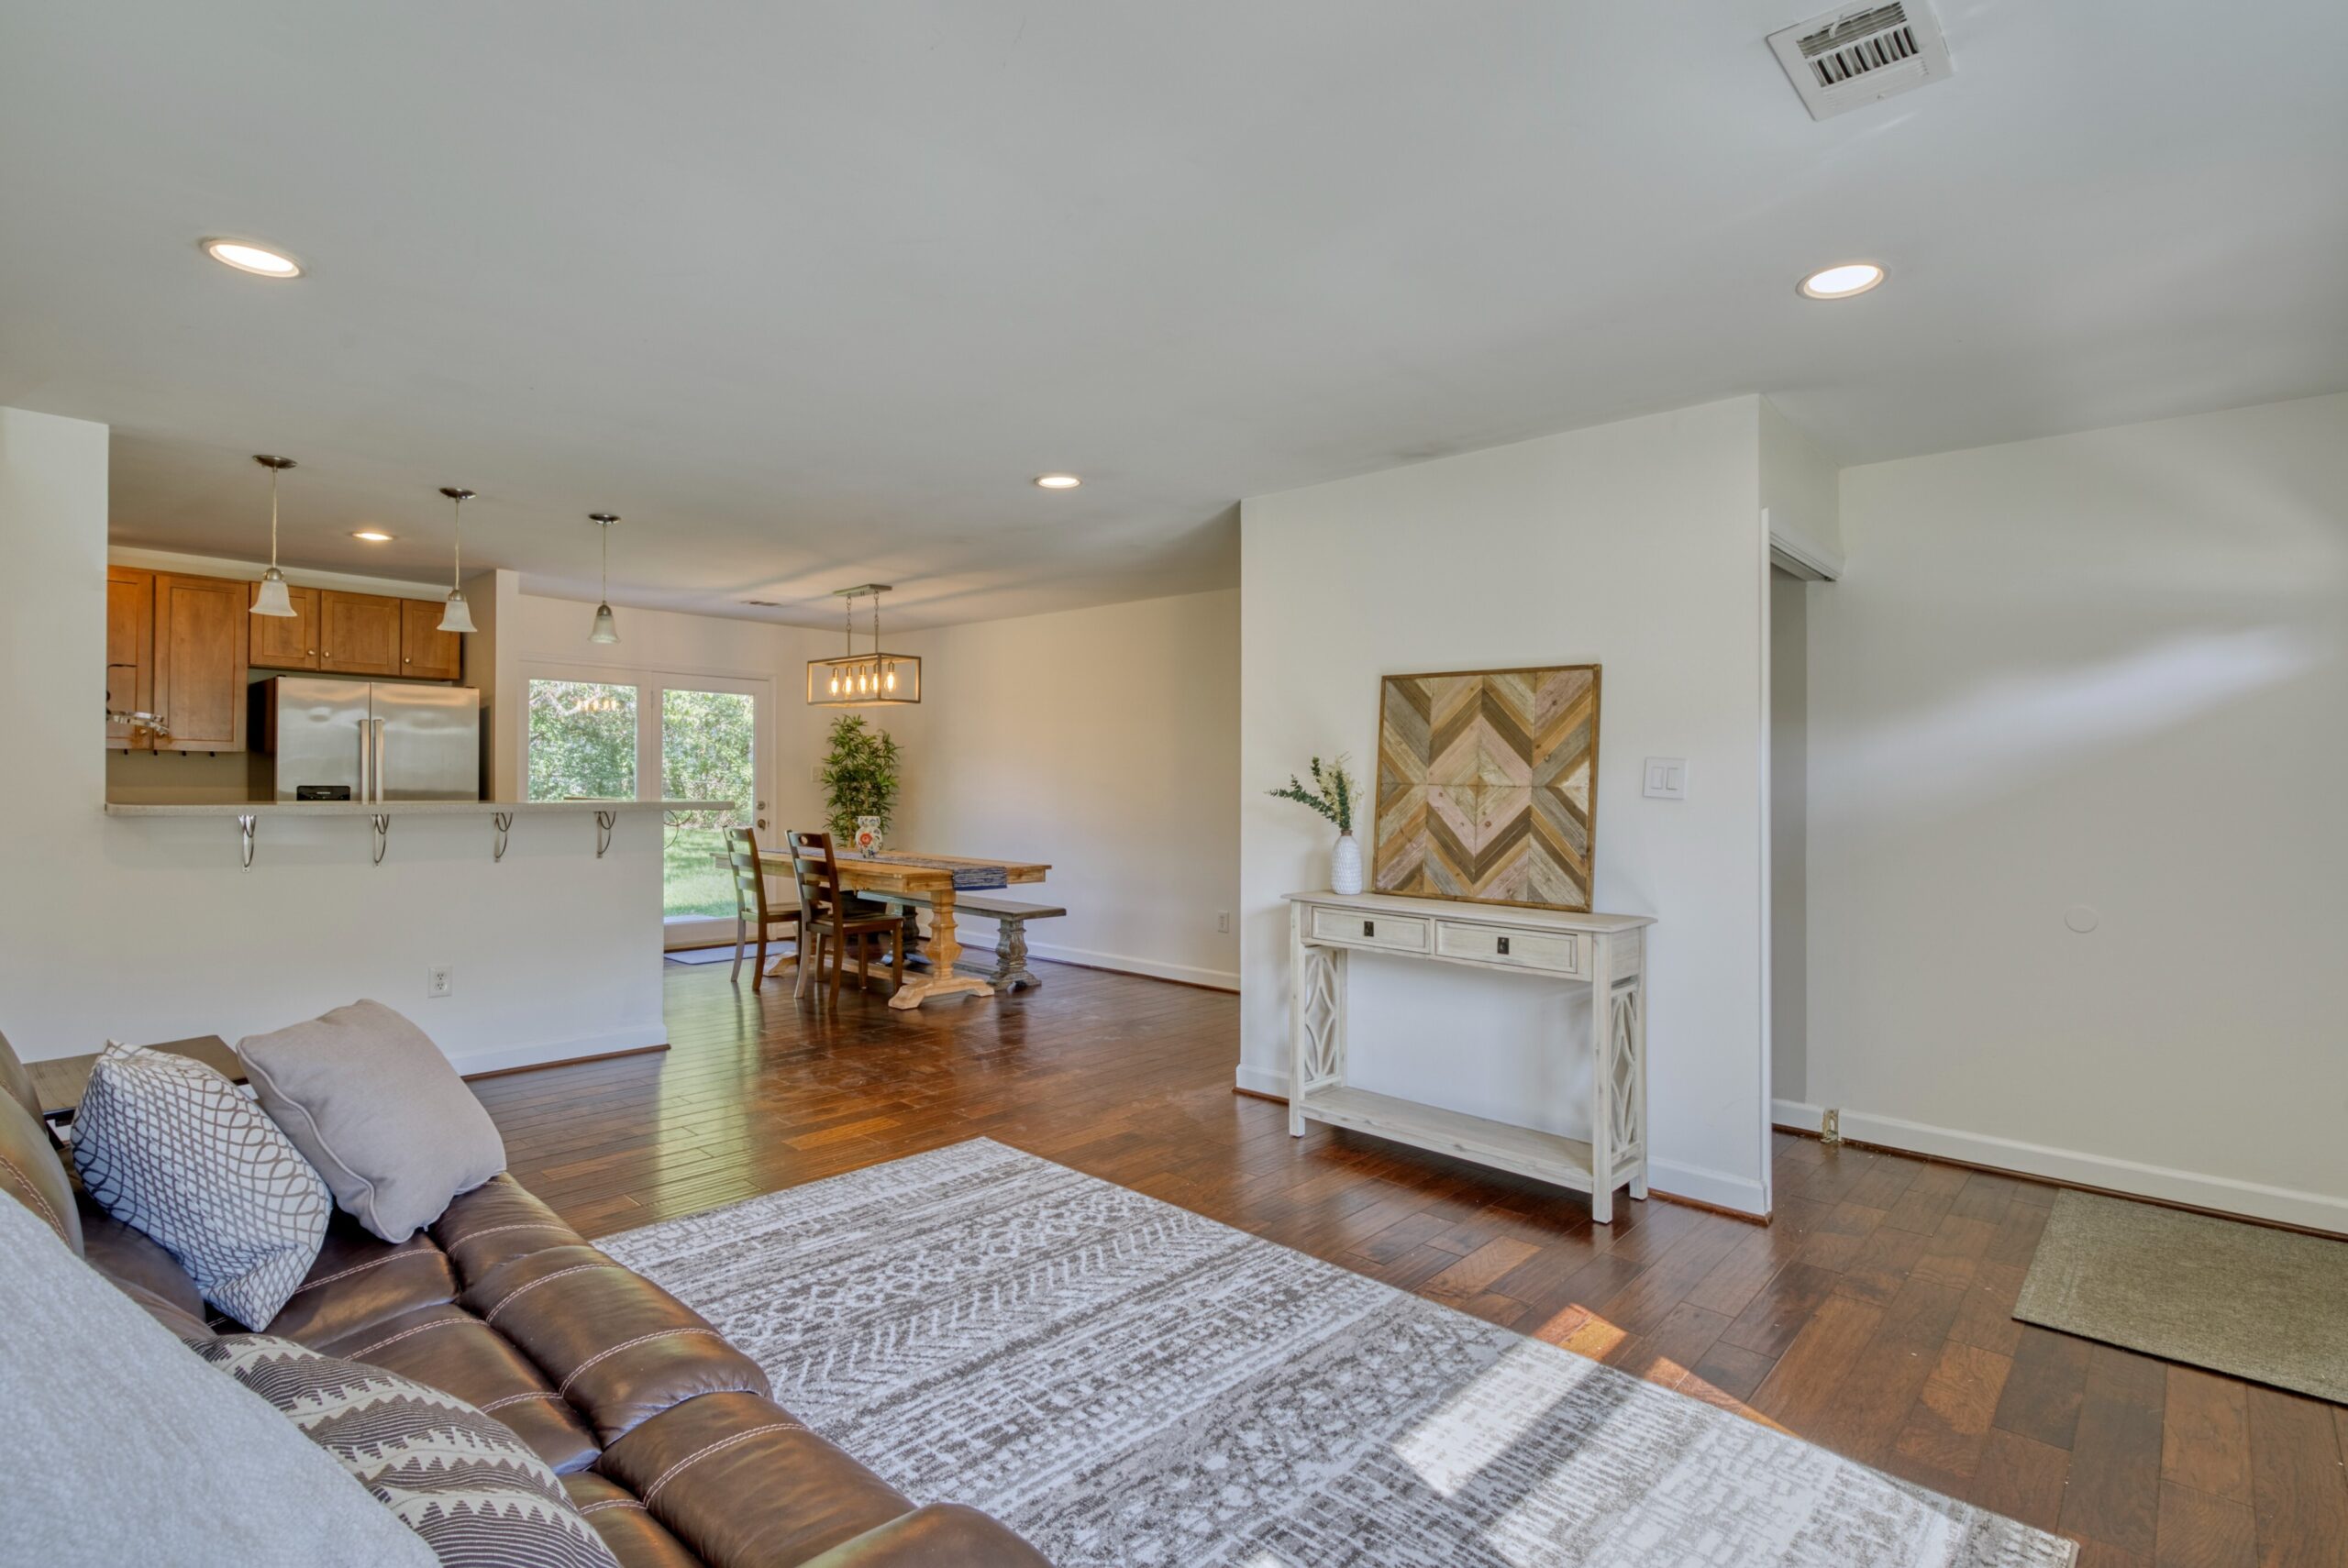 Professional interior photo of 1103 S Greenthorn Ave in Sterling, VA - showing the family room with hardwood floors, dining/kitchen in the background